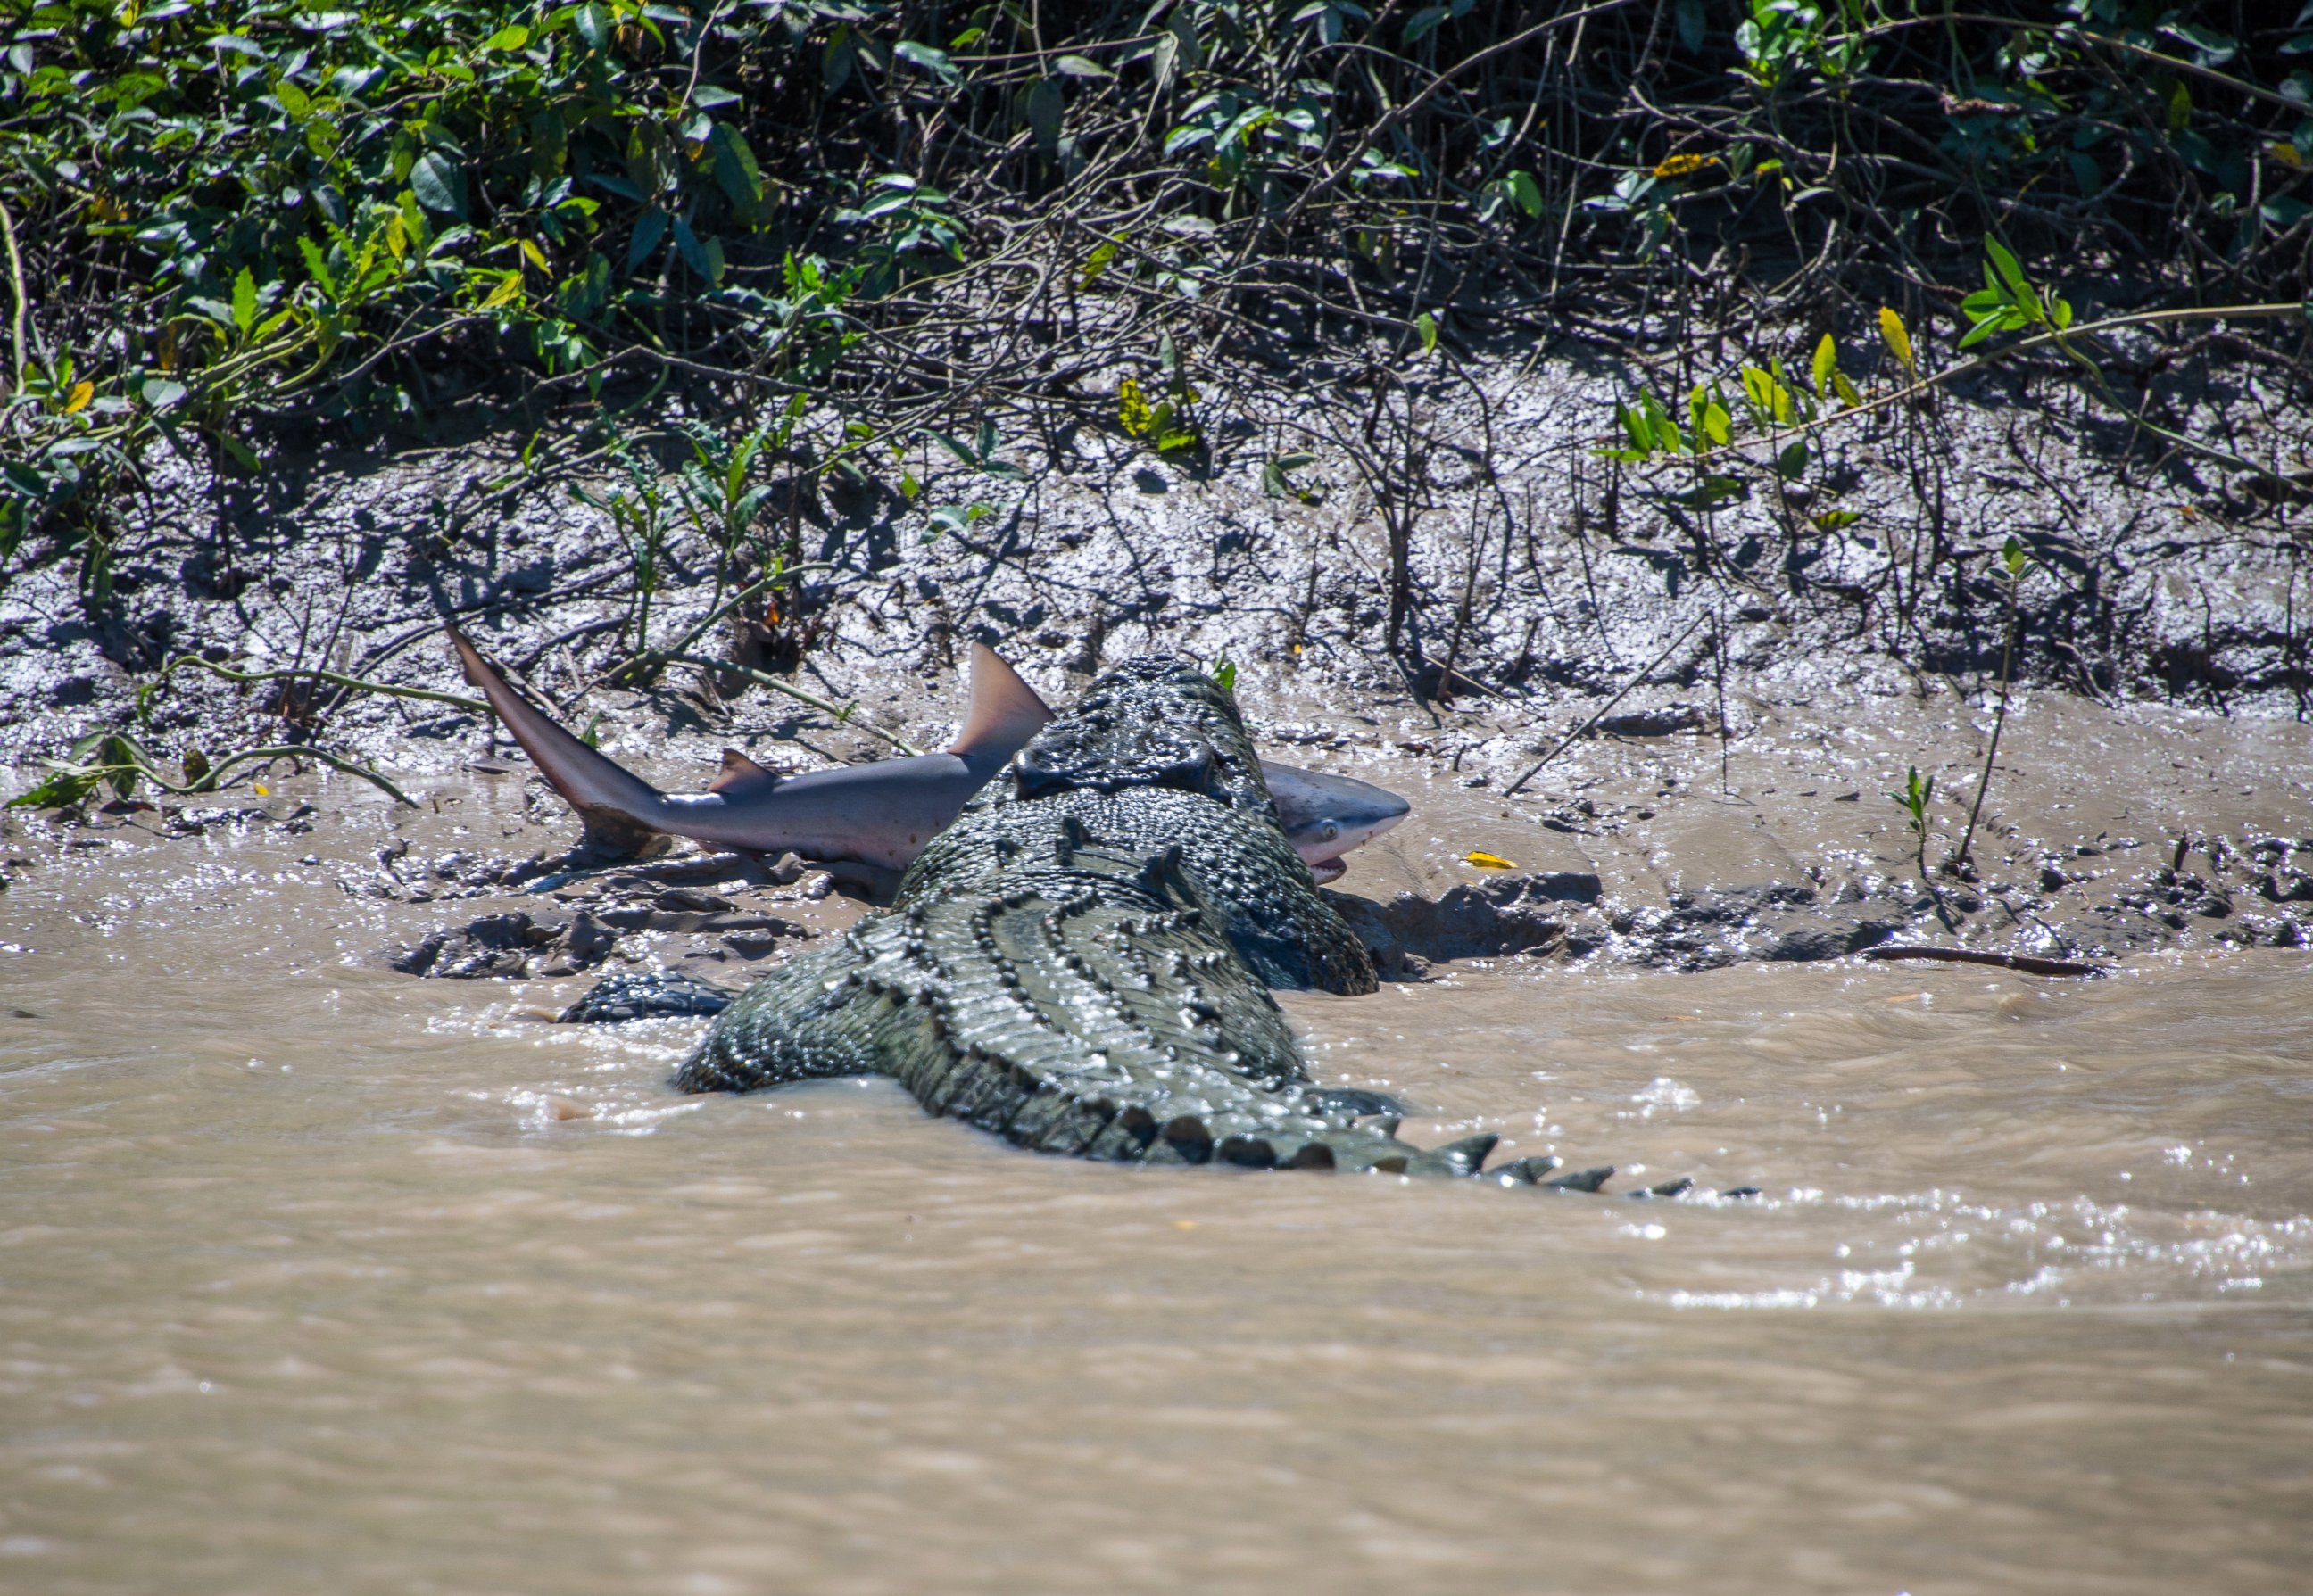 PHOTO: Andrew Paice of Sydney, Australia photographed a crocodile nicknamed "Brutus" eating a live shark while on Adelaide River cruise on August 5, 2014.